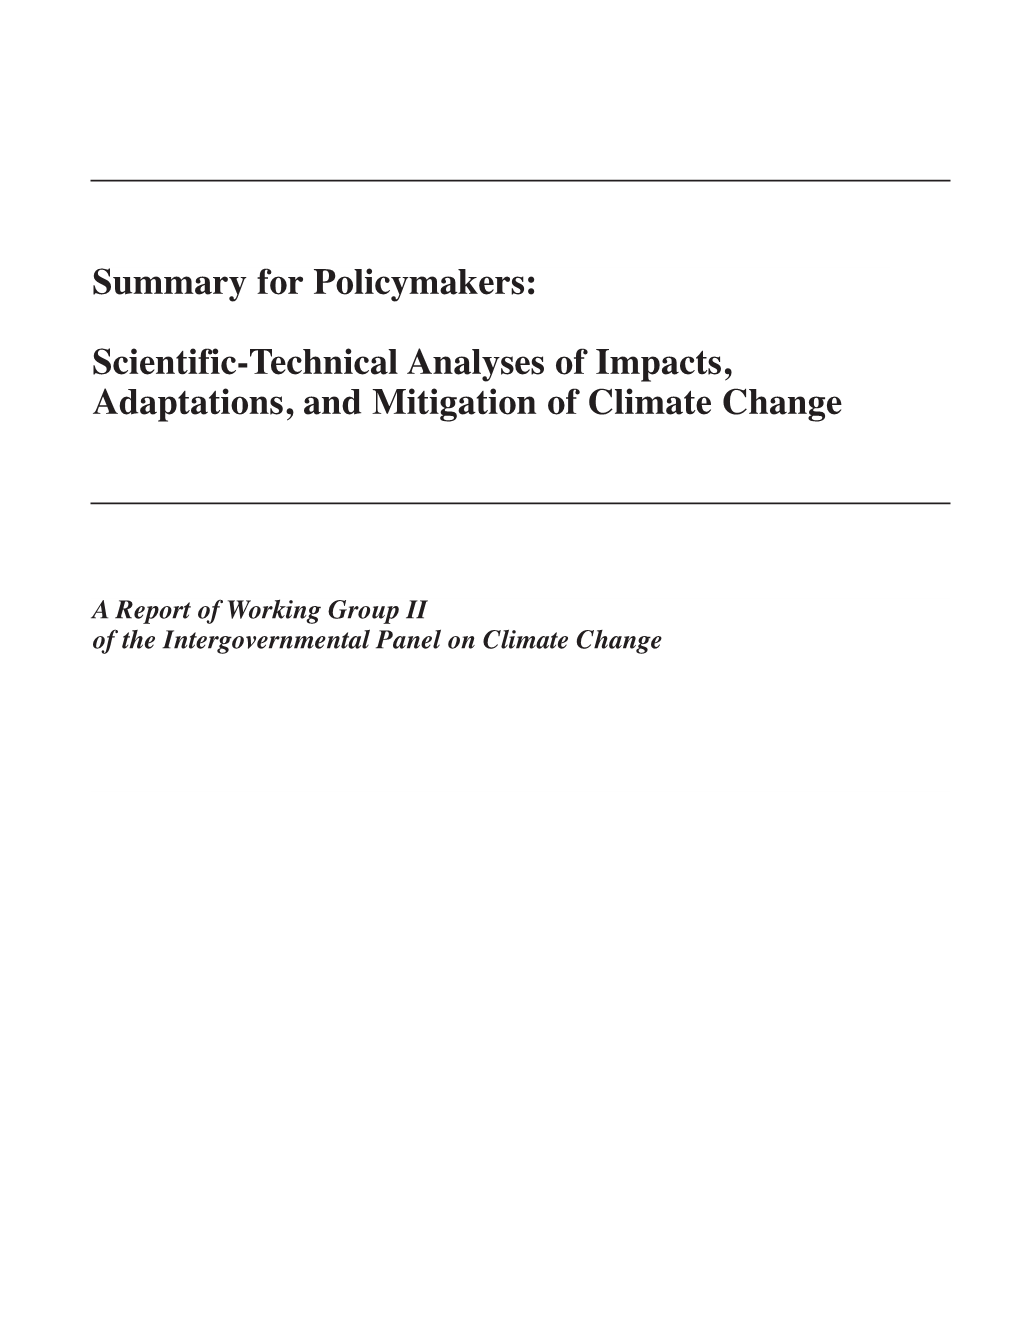 Scientific-Technical Analyses of Impacts, Adaptations, and Mitigation of Climate Change